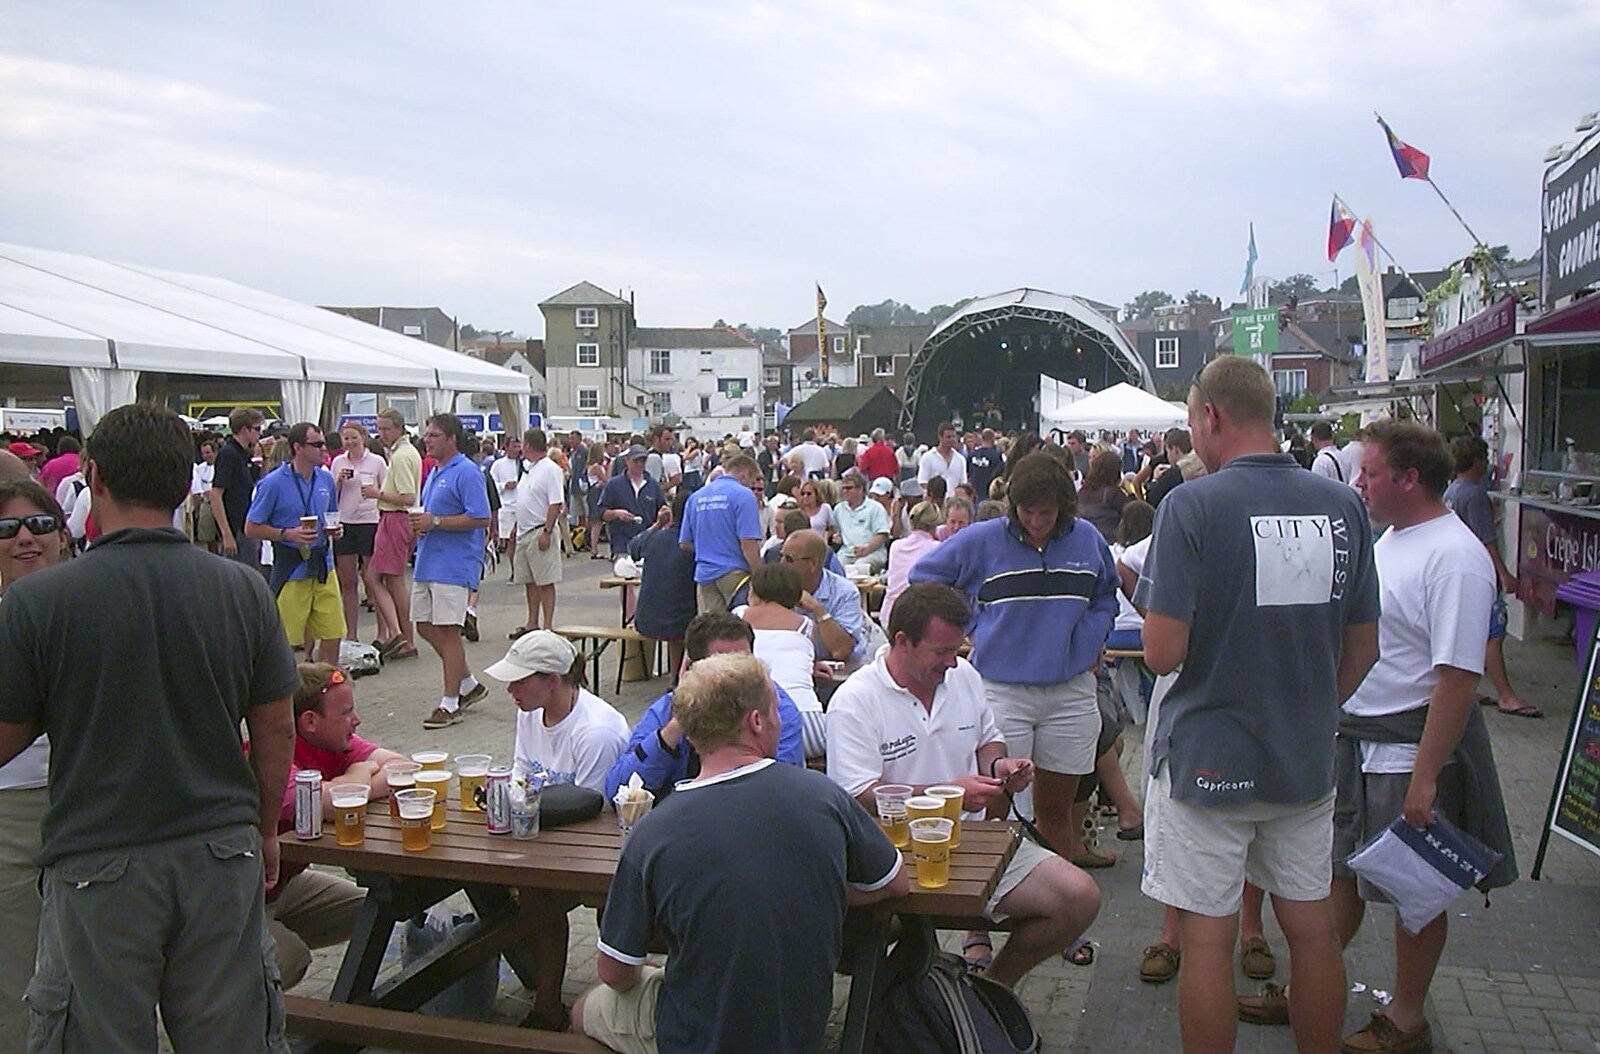 The post-race hangout from Cowes Weekend, Cowes, Isle of Wight - 7th August 2004